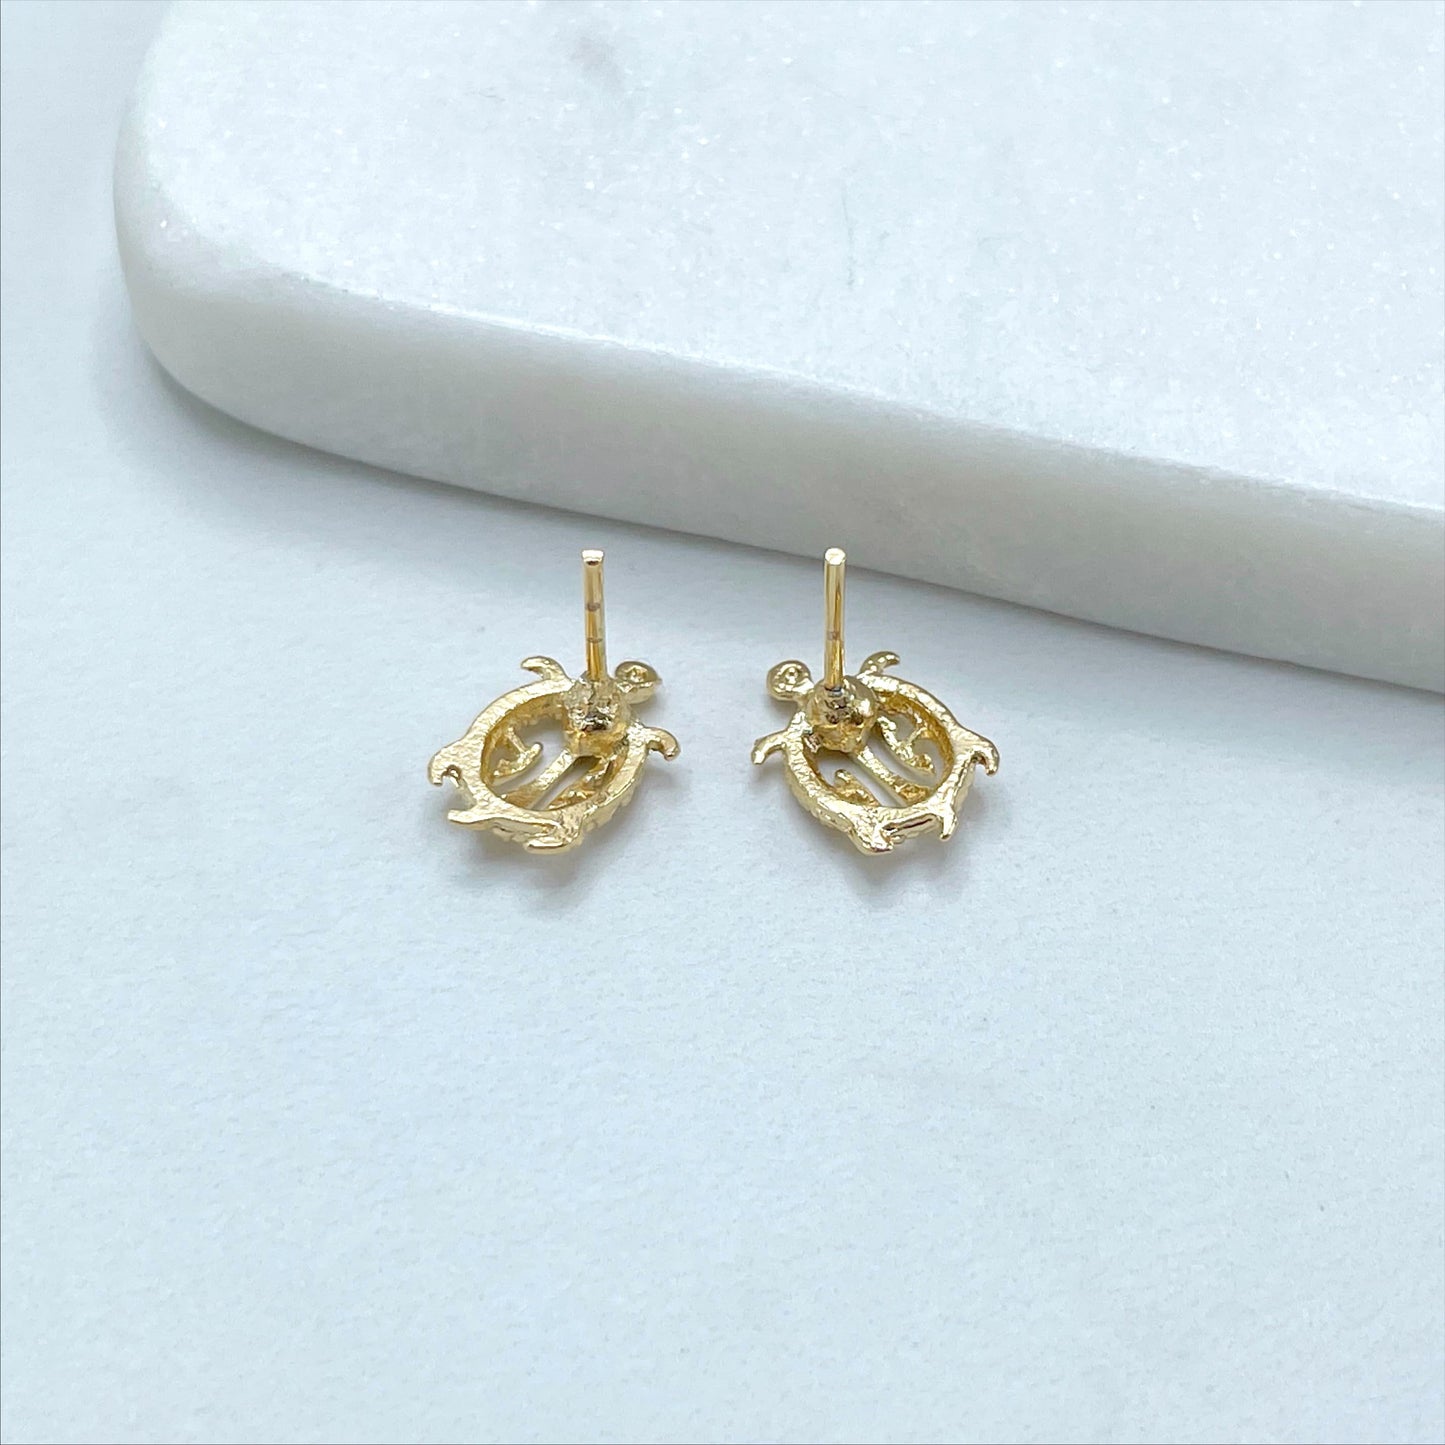 18k Gold Filled Tiny Turtle Stud Earrings Wholesale Jewelry Making Supplies